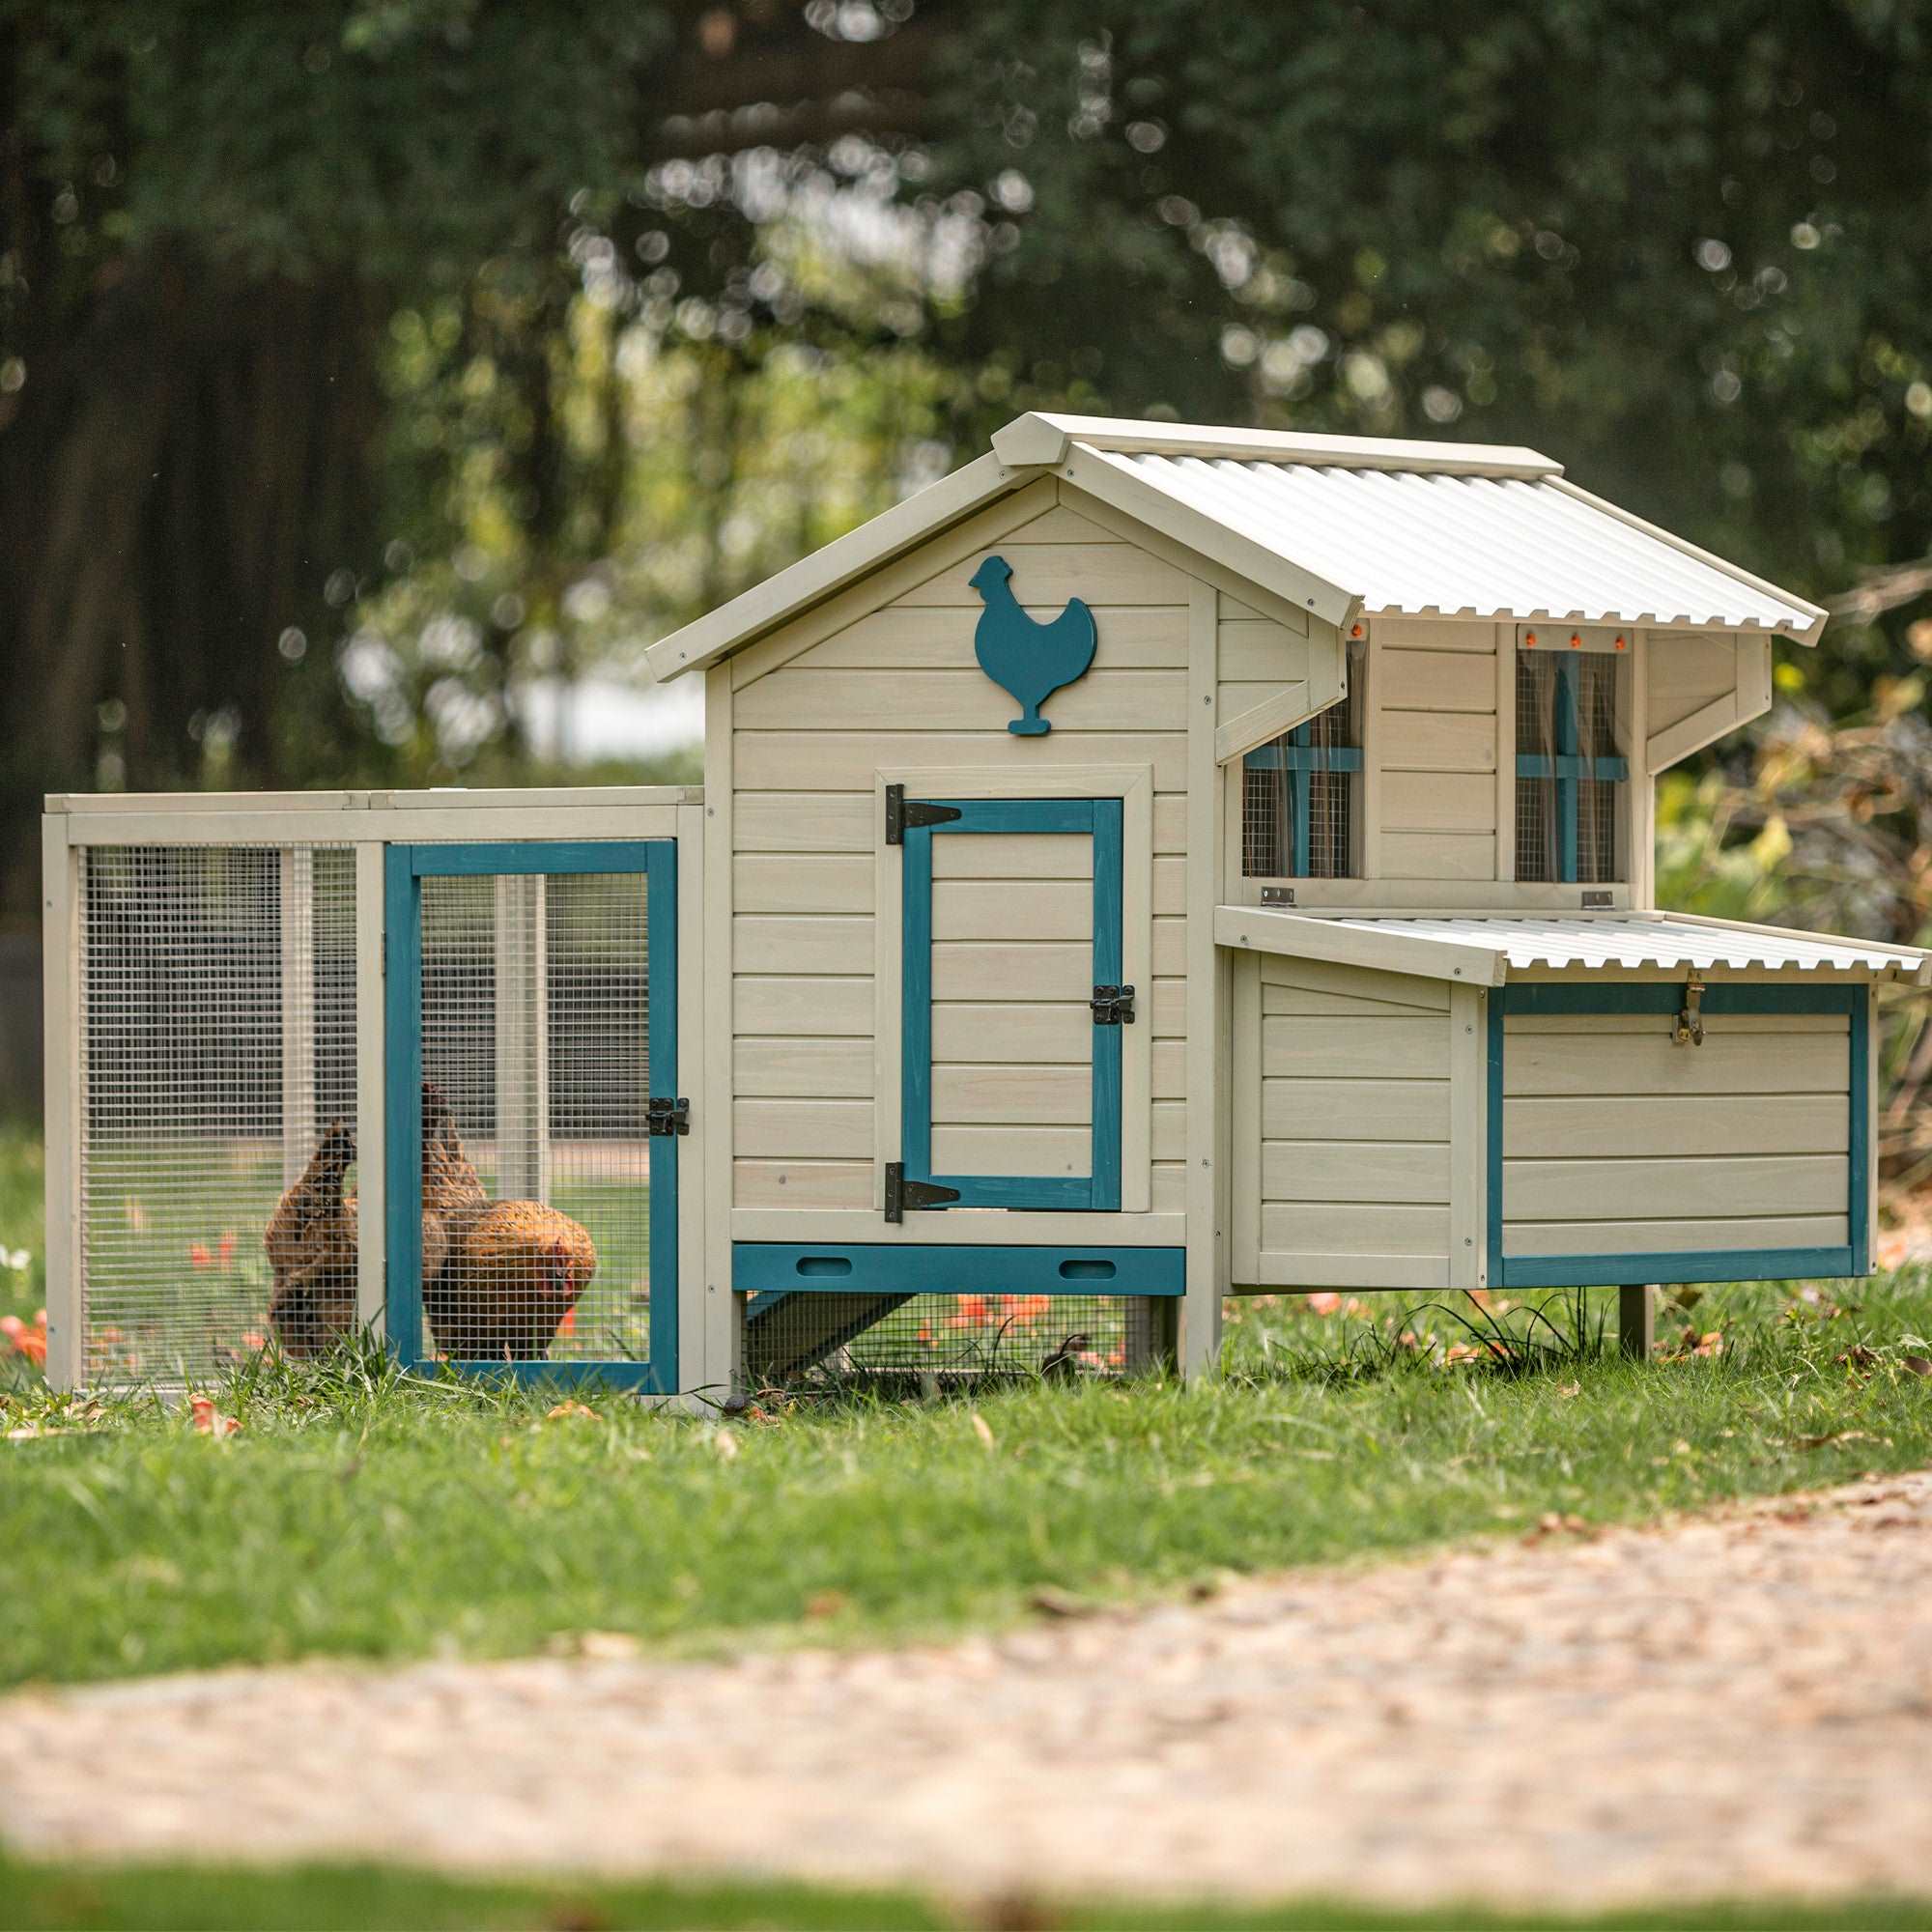 petsfit-premium-pvc-roofed-wooden-chicken-coop-multi-level-outdoor-poultry-cage-with-spacious-nesting-boxes-01